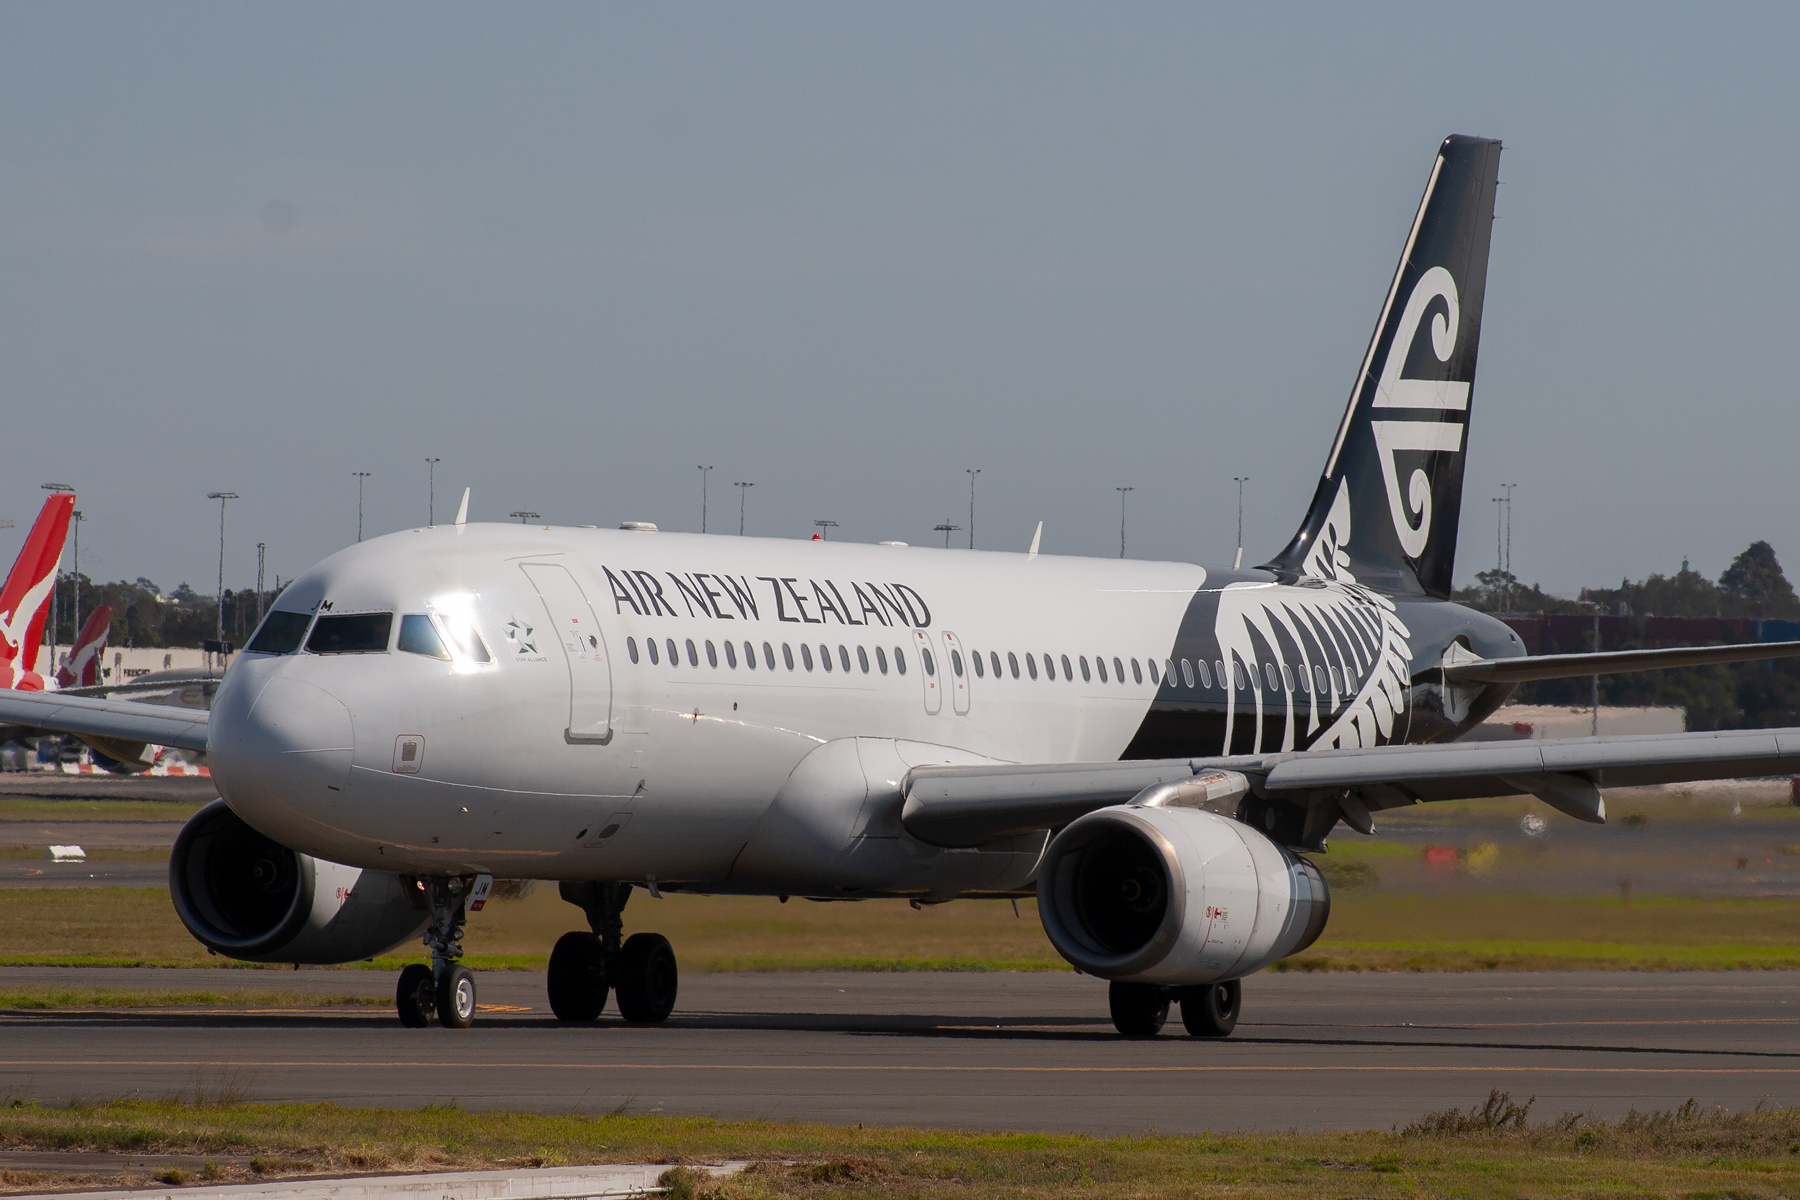 Air New Zealand Airbus A320-200 ZK-OJM at Kingsford Smith